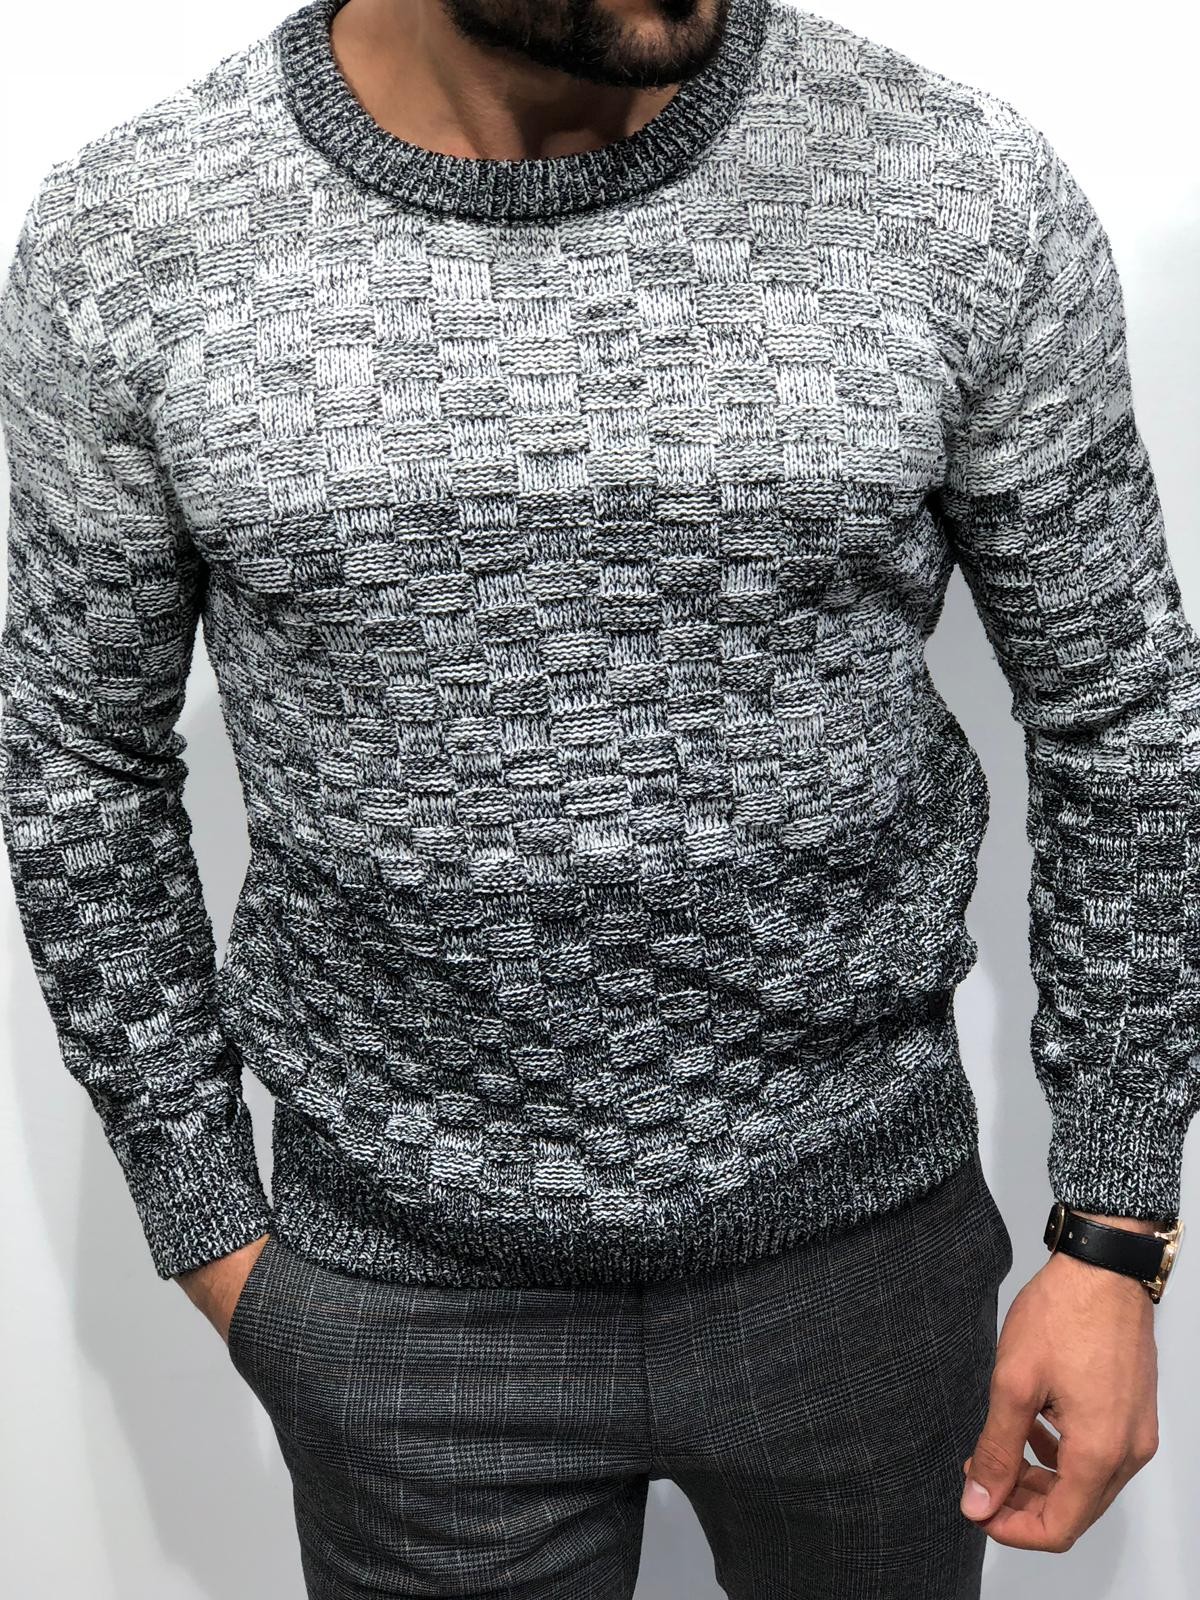 Buy Gray Slim Fit Sweater by Gentwith.com with Free Shipping